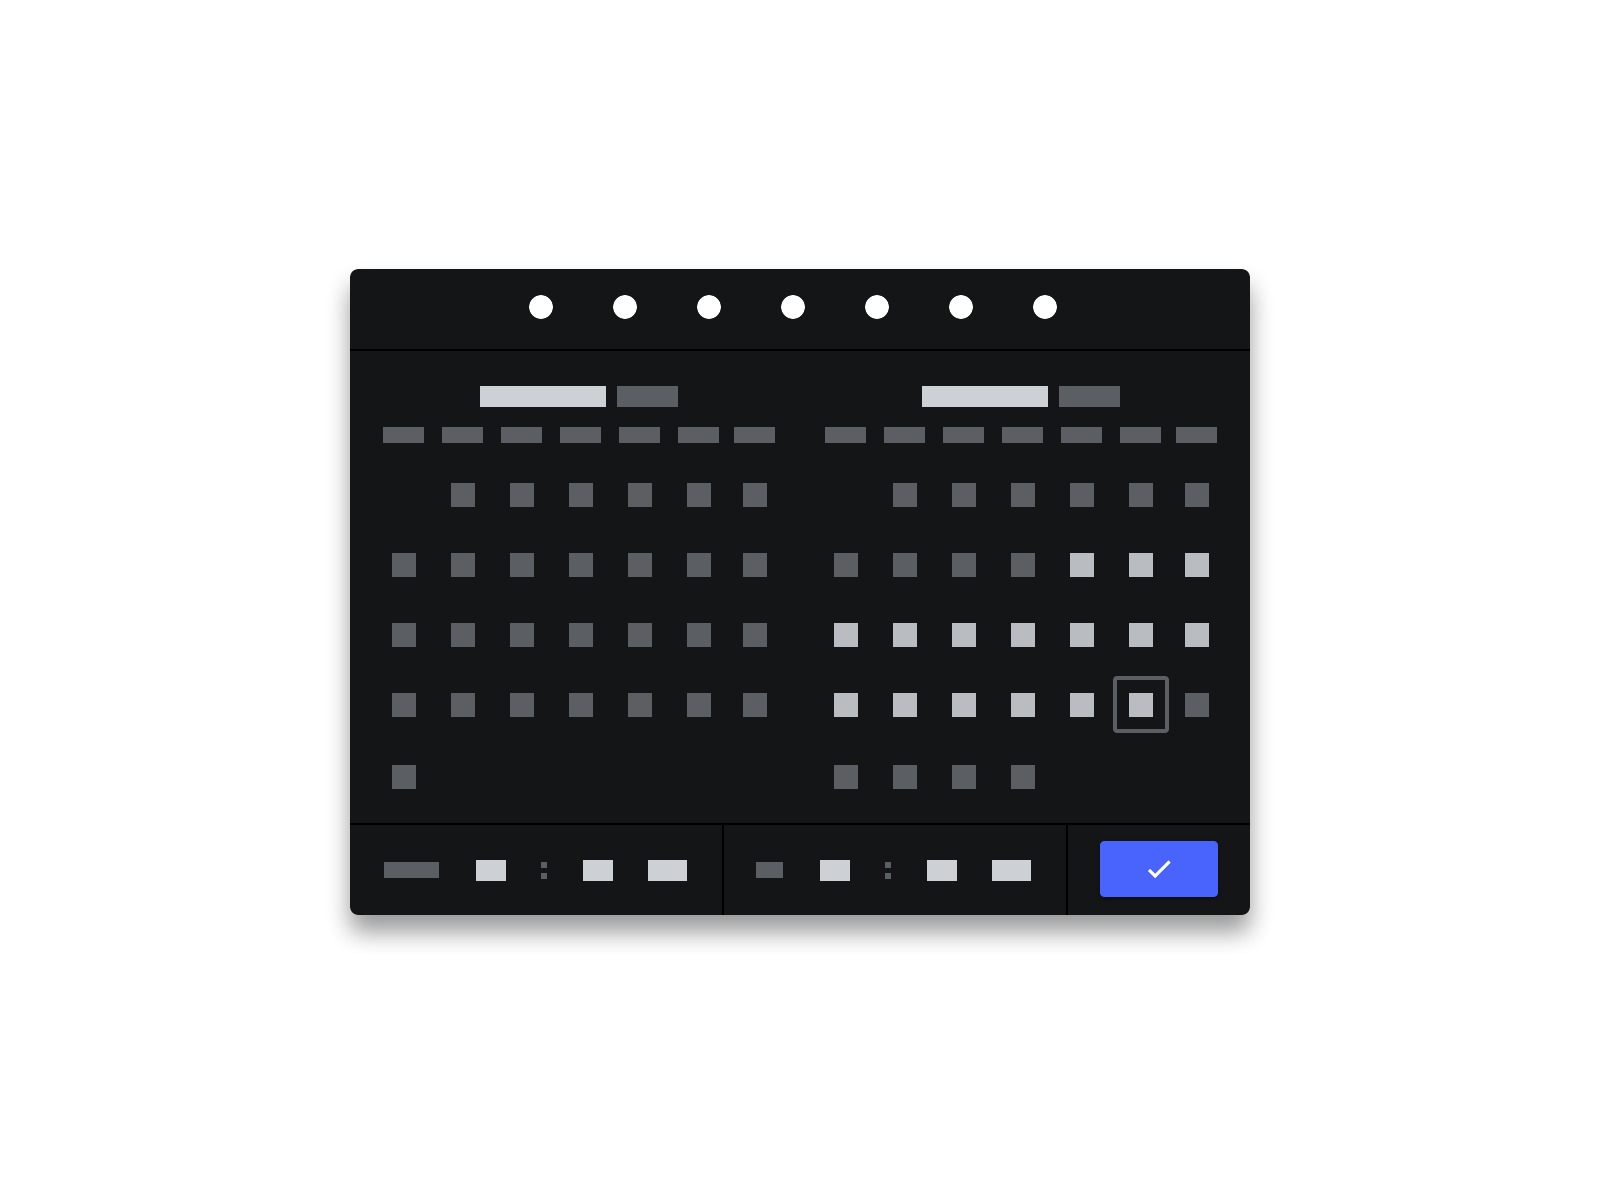 Date & Time Picker - Early Prototype